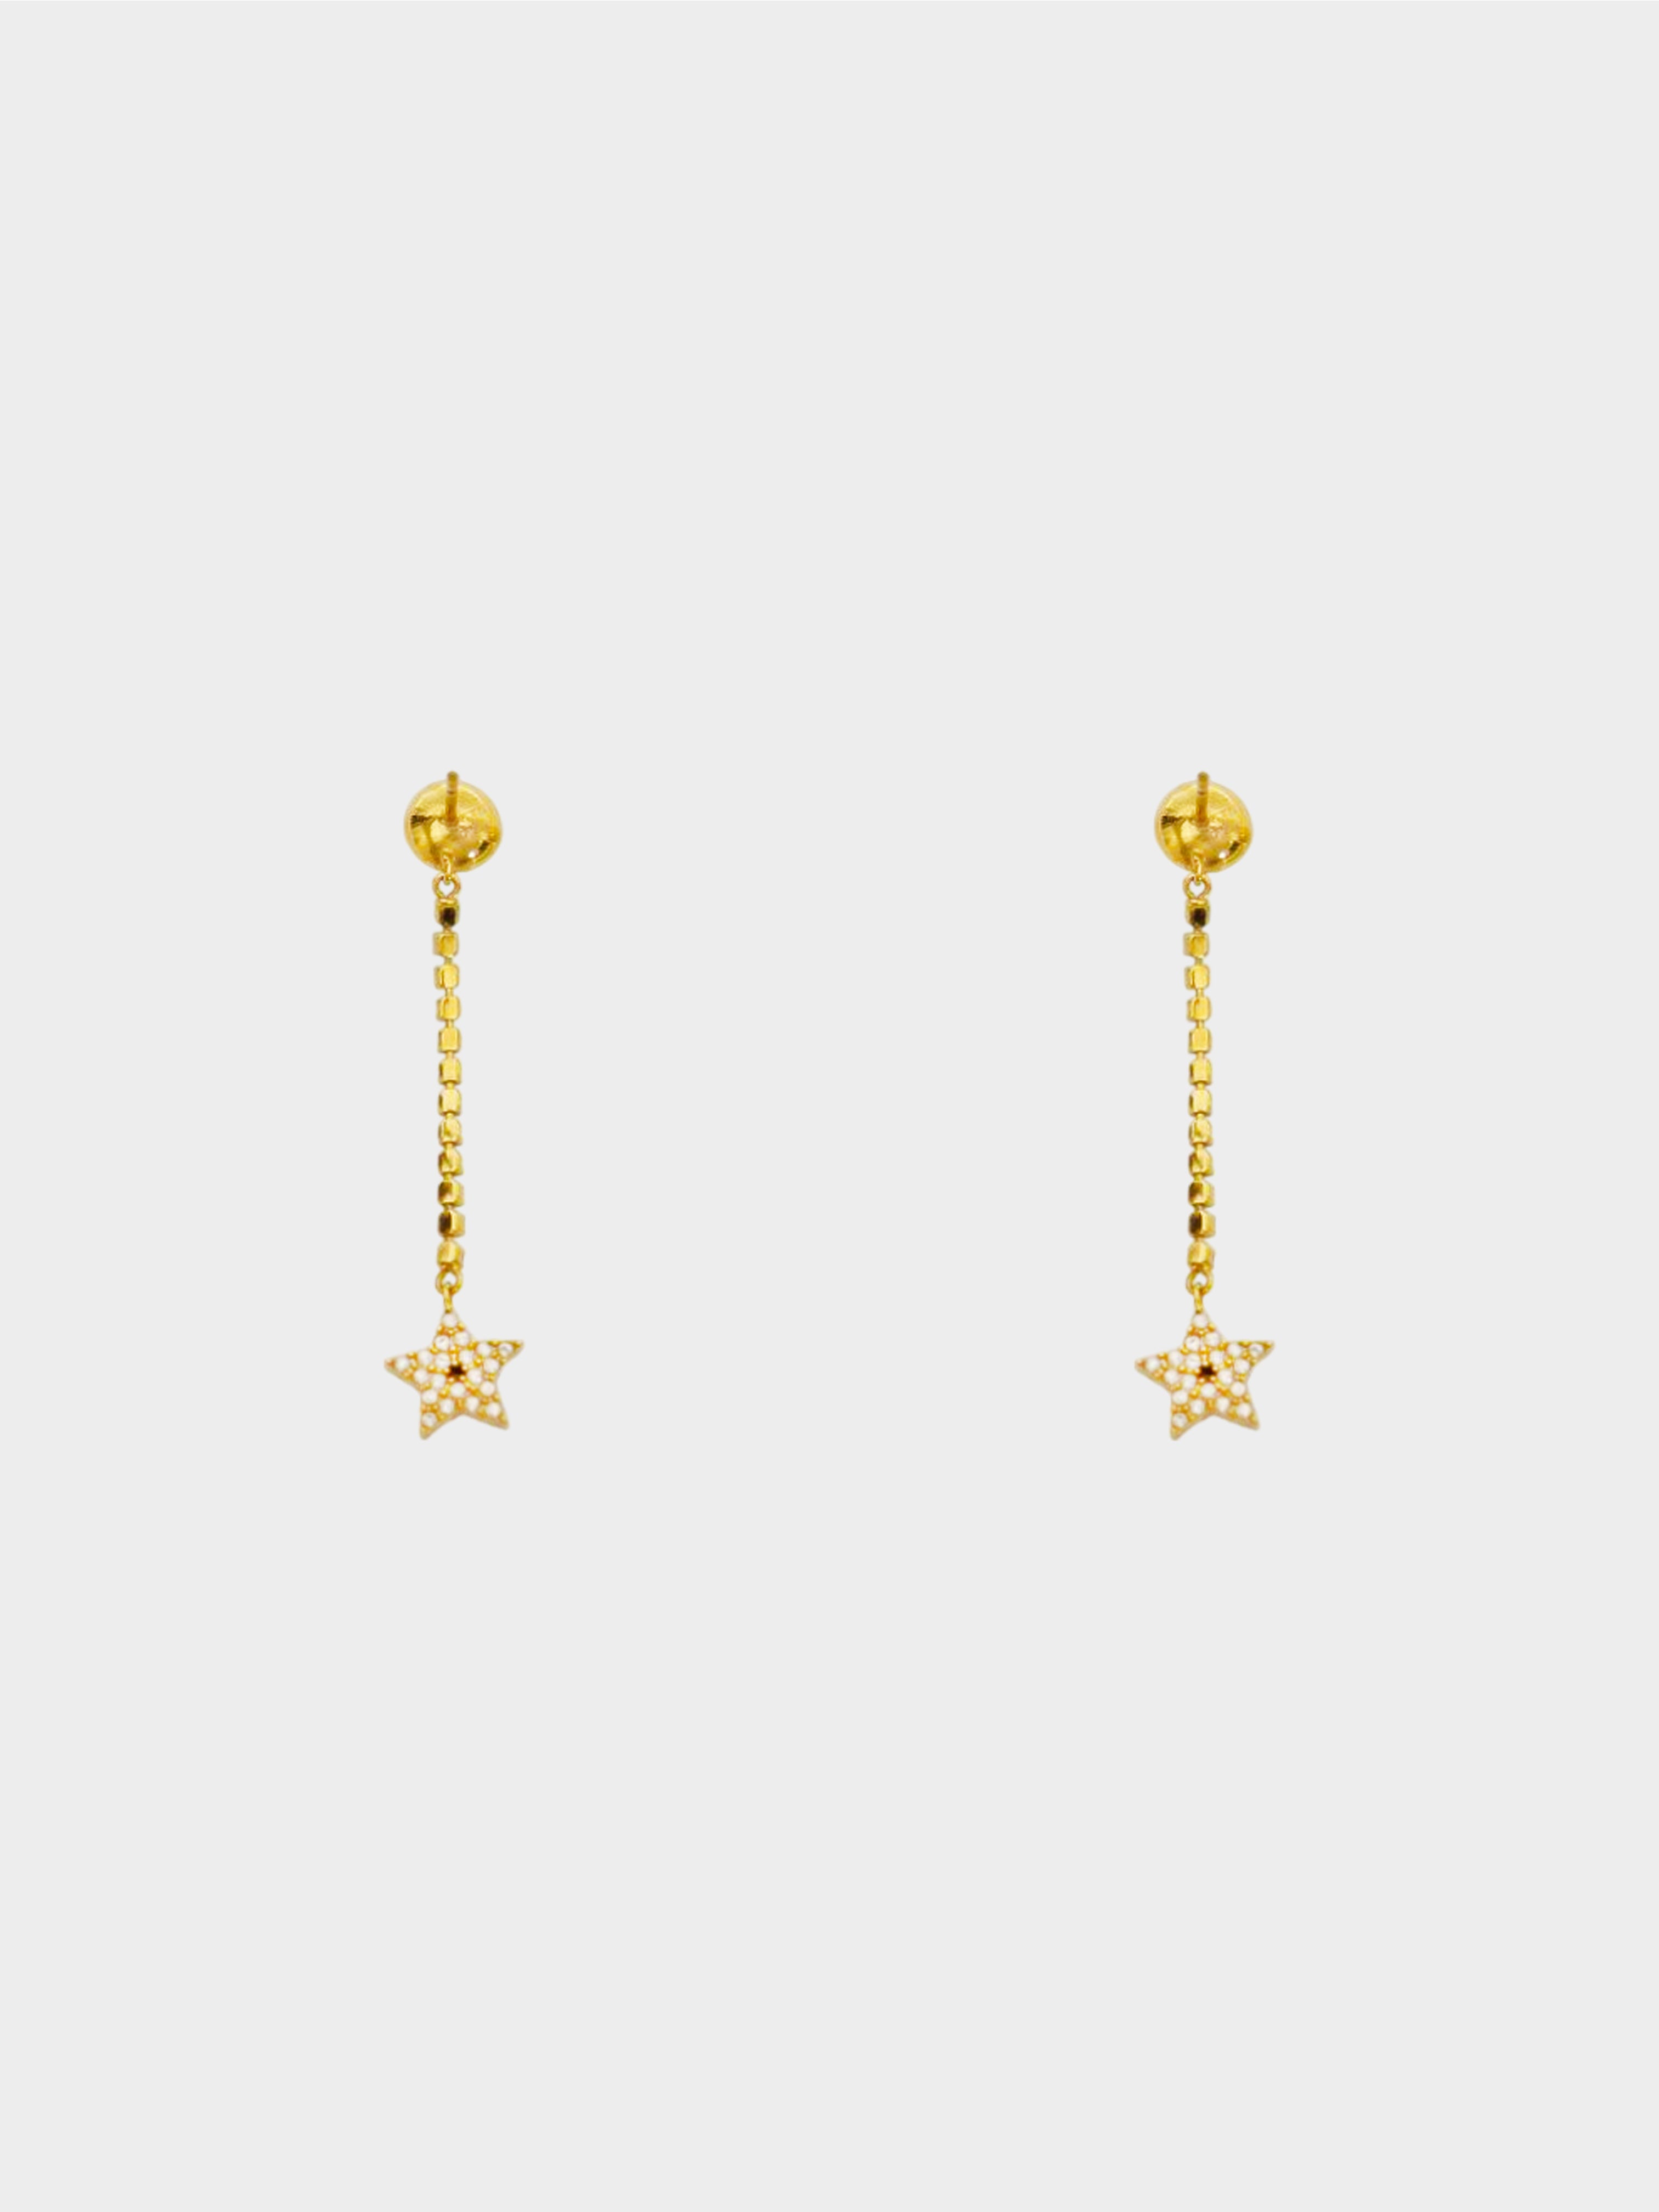 Christian Dior SS 2020 Gold Tribales Hanging Earrings